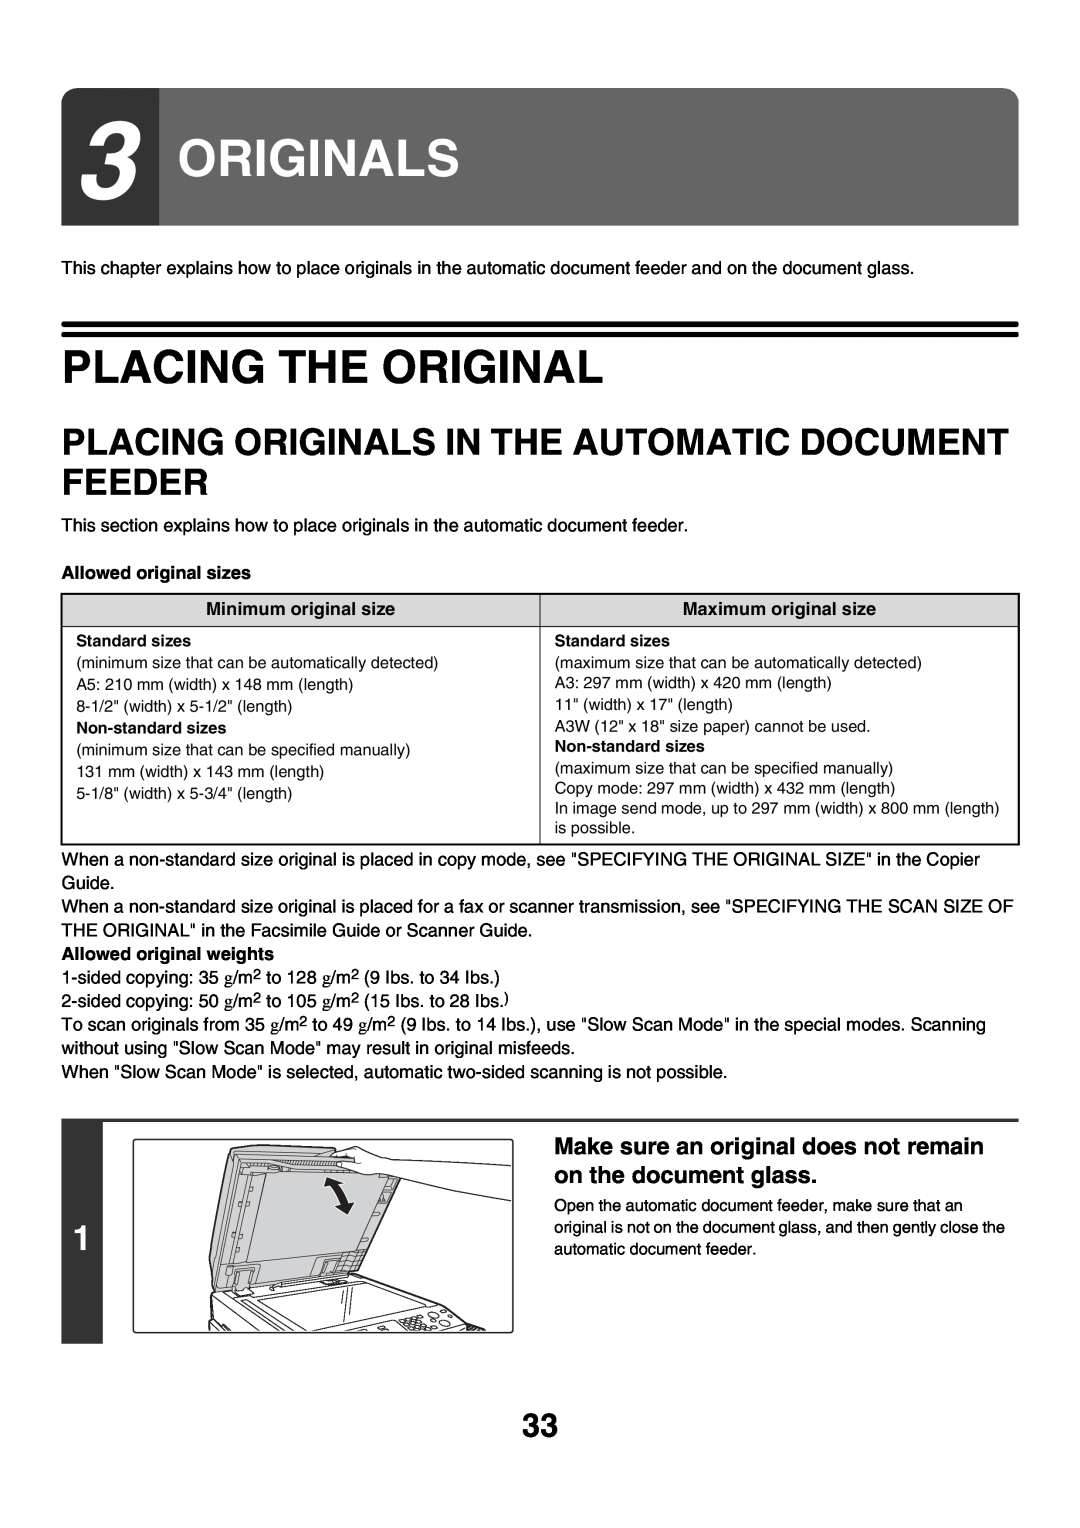 Sharp MX-2300G manual Placing The Original, Placing Originals In The Automatic Document Feeder, on the document glass 